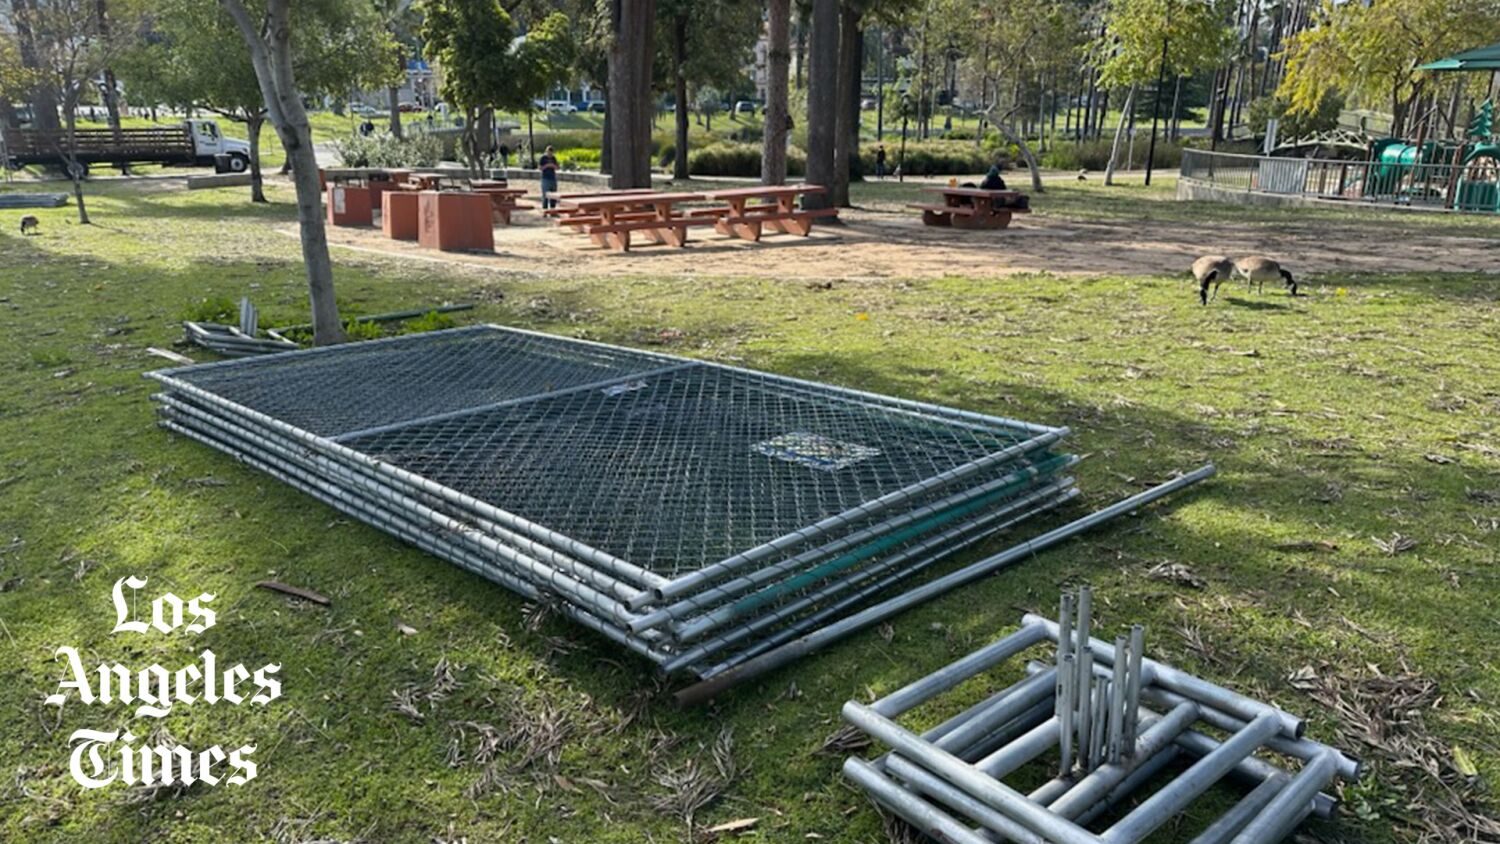 The fence around Echo Park Lake is being dismantled